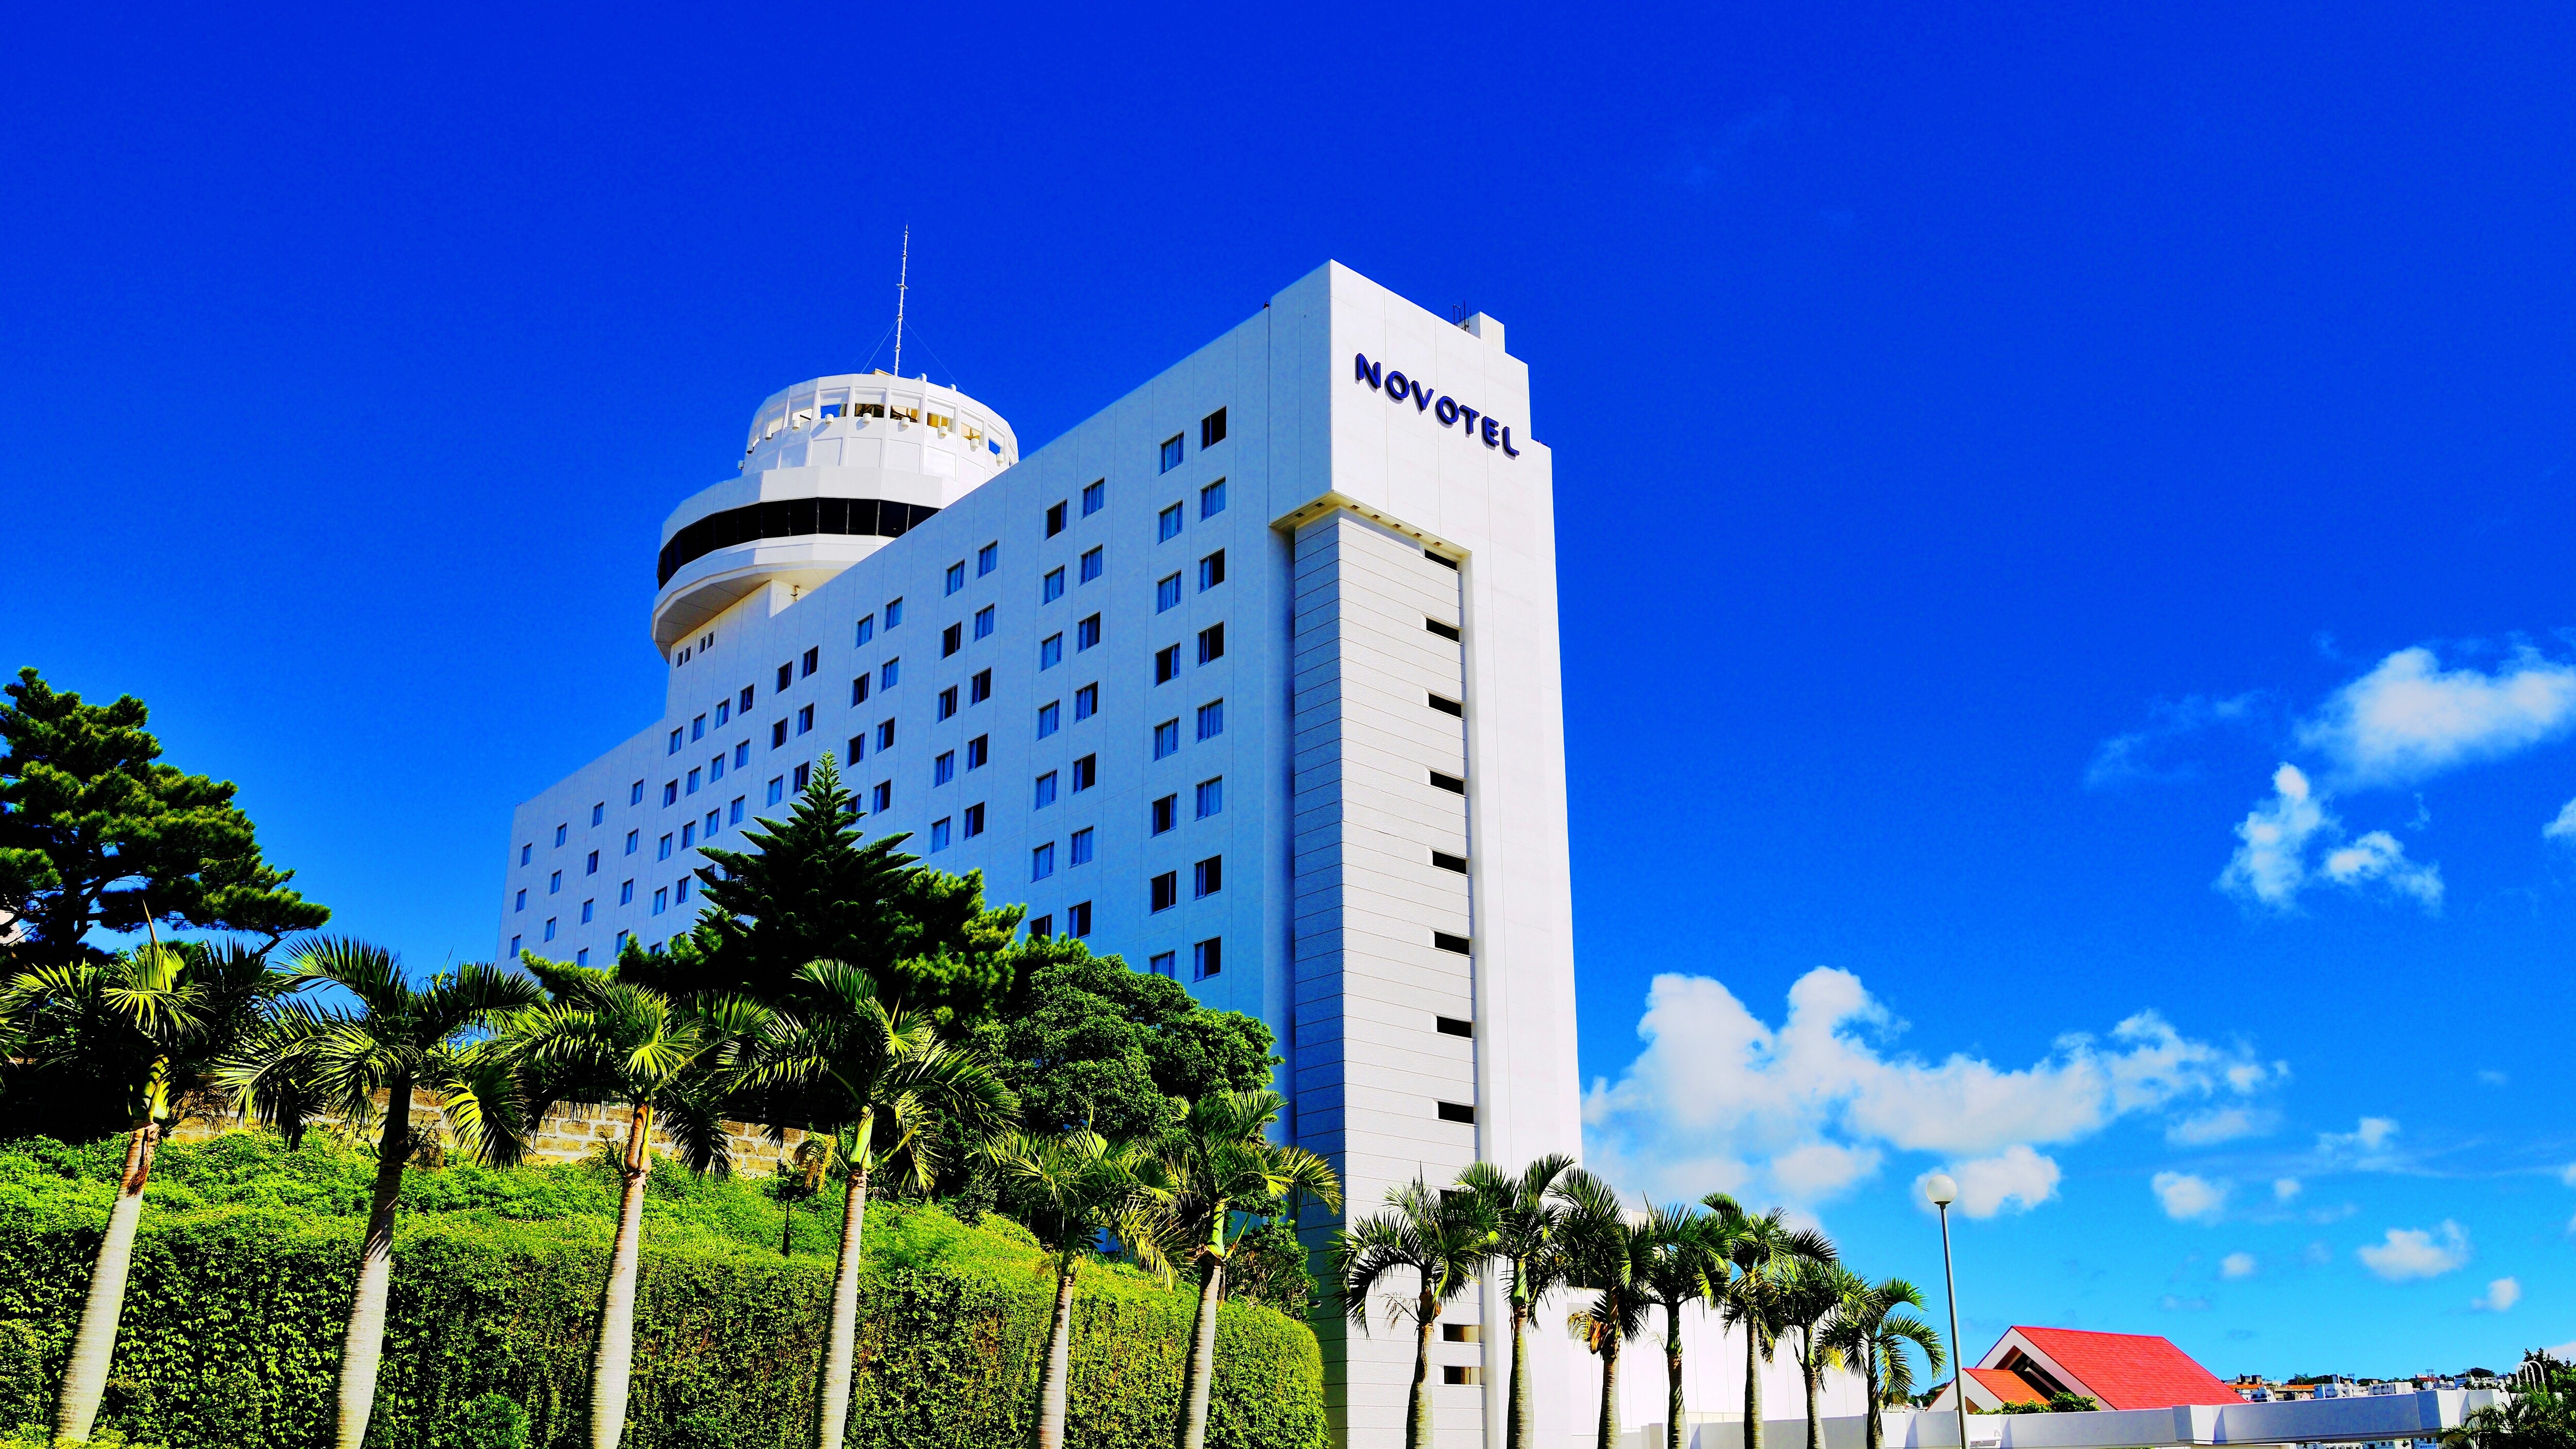 [Novotel Okinawa Naha Appearance Noon] Enjoy the elegant appearance of the ancient city of Shuri and the relaxation of the city resort.